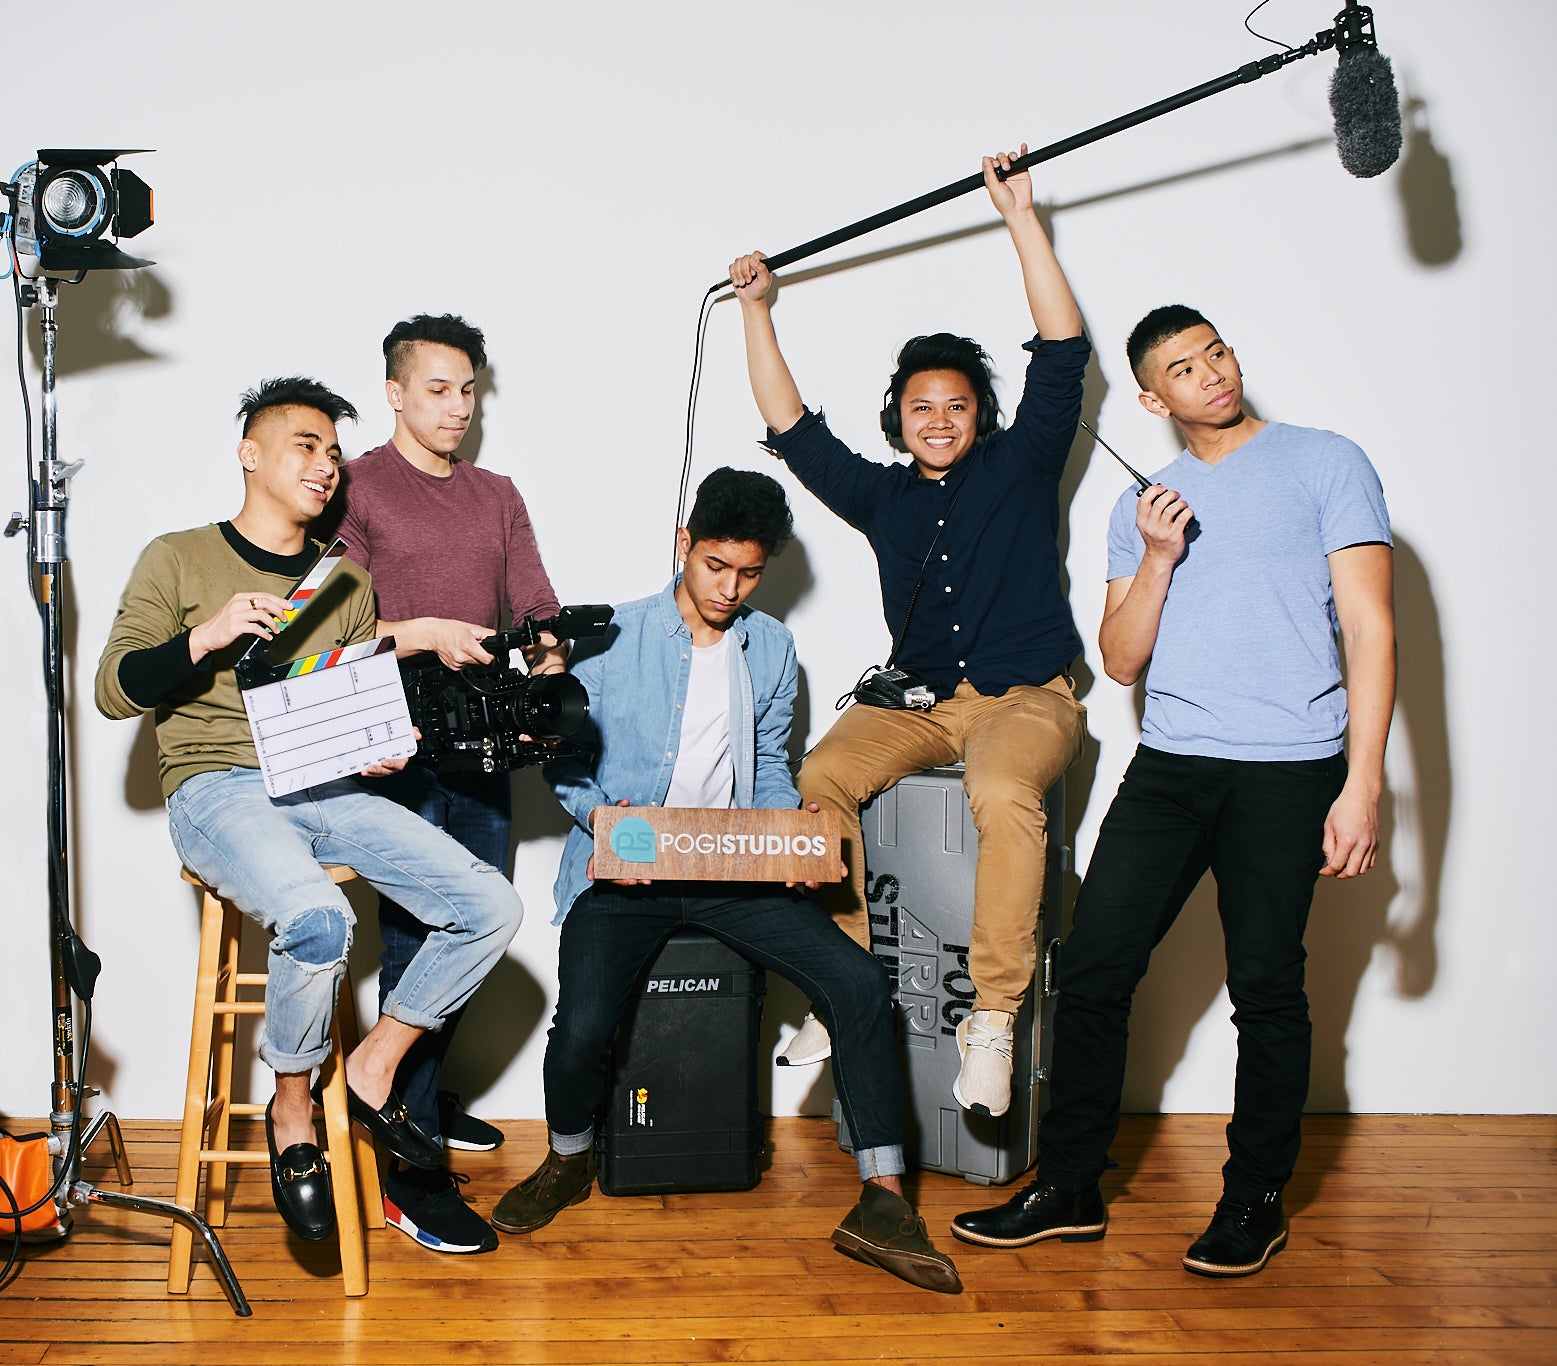 The owners of Pogi Studios (from left to right: JP Quindara, Bryan Wright, Cain Camacho, Bryan Casallo, and Brian Almalvez